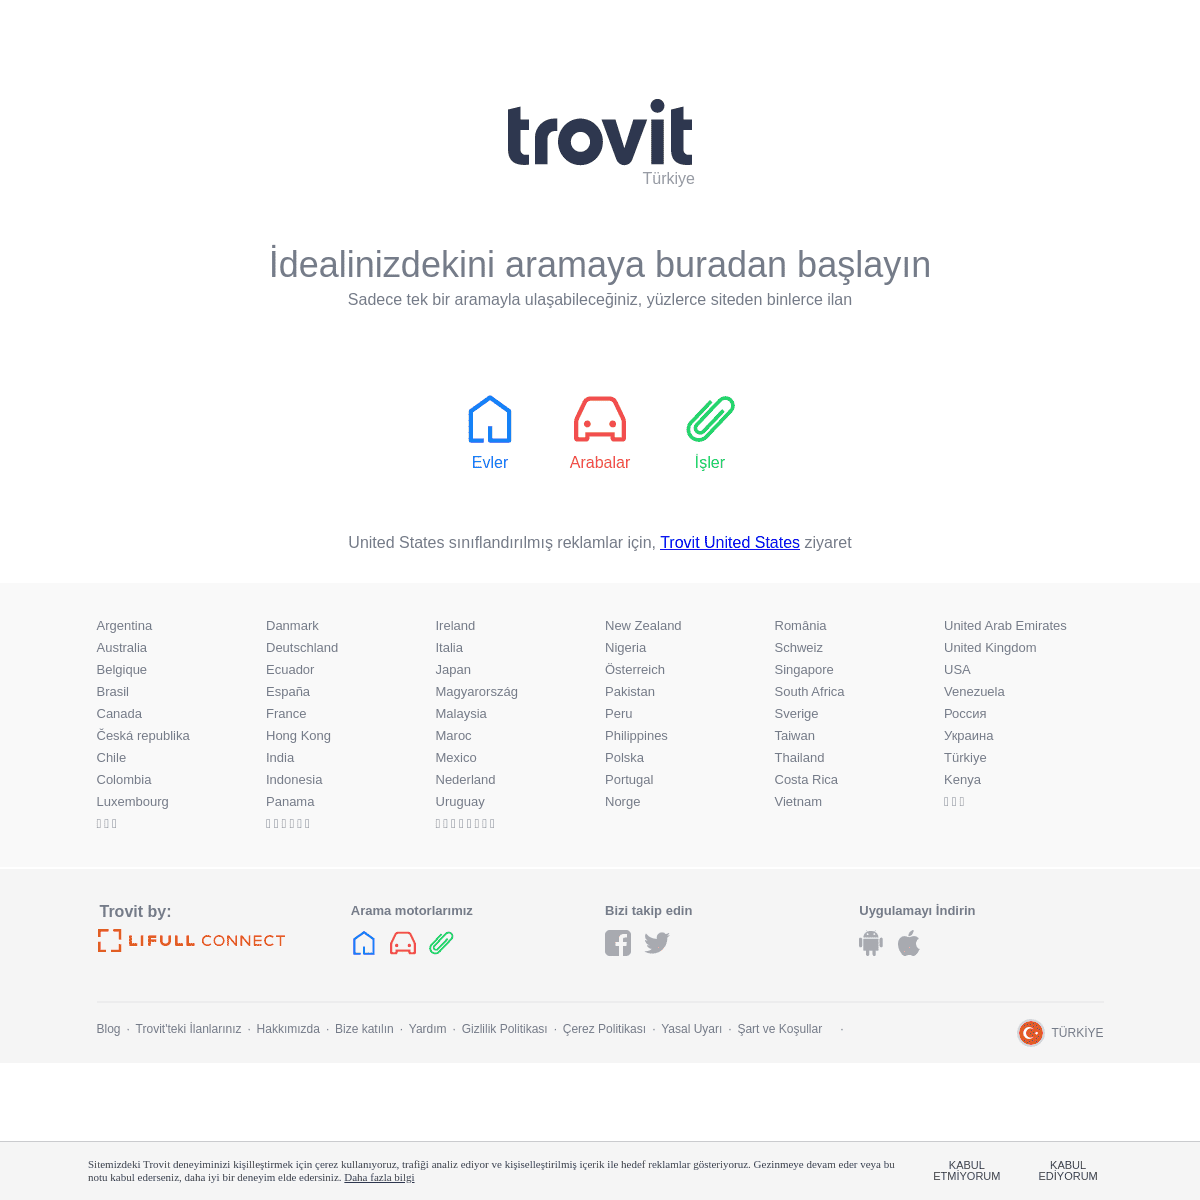 A complete backup of trovit.com.tr